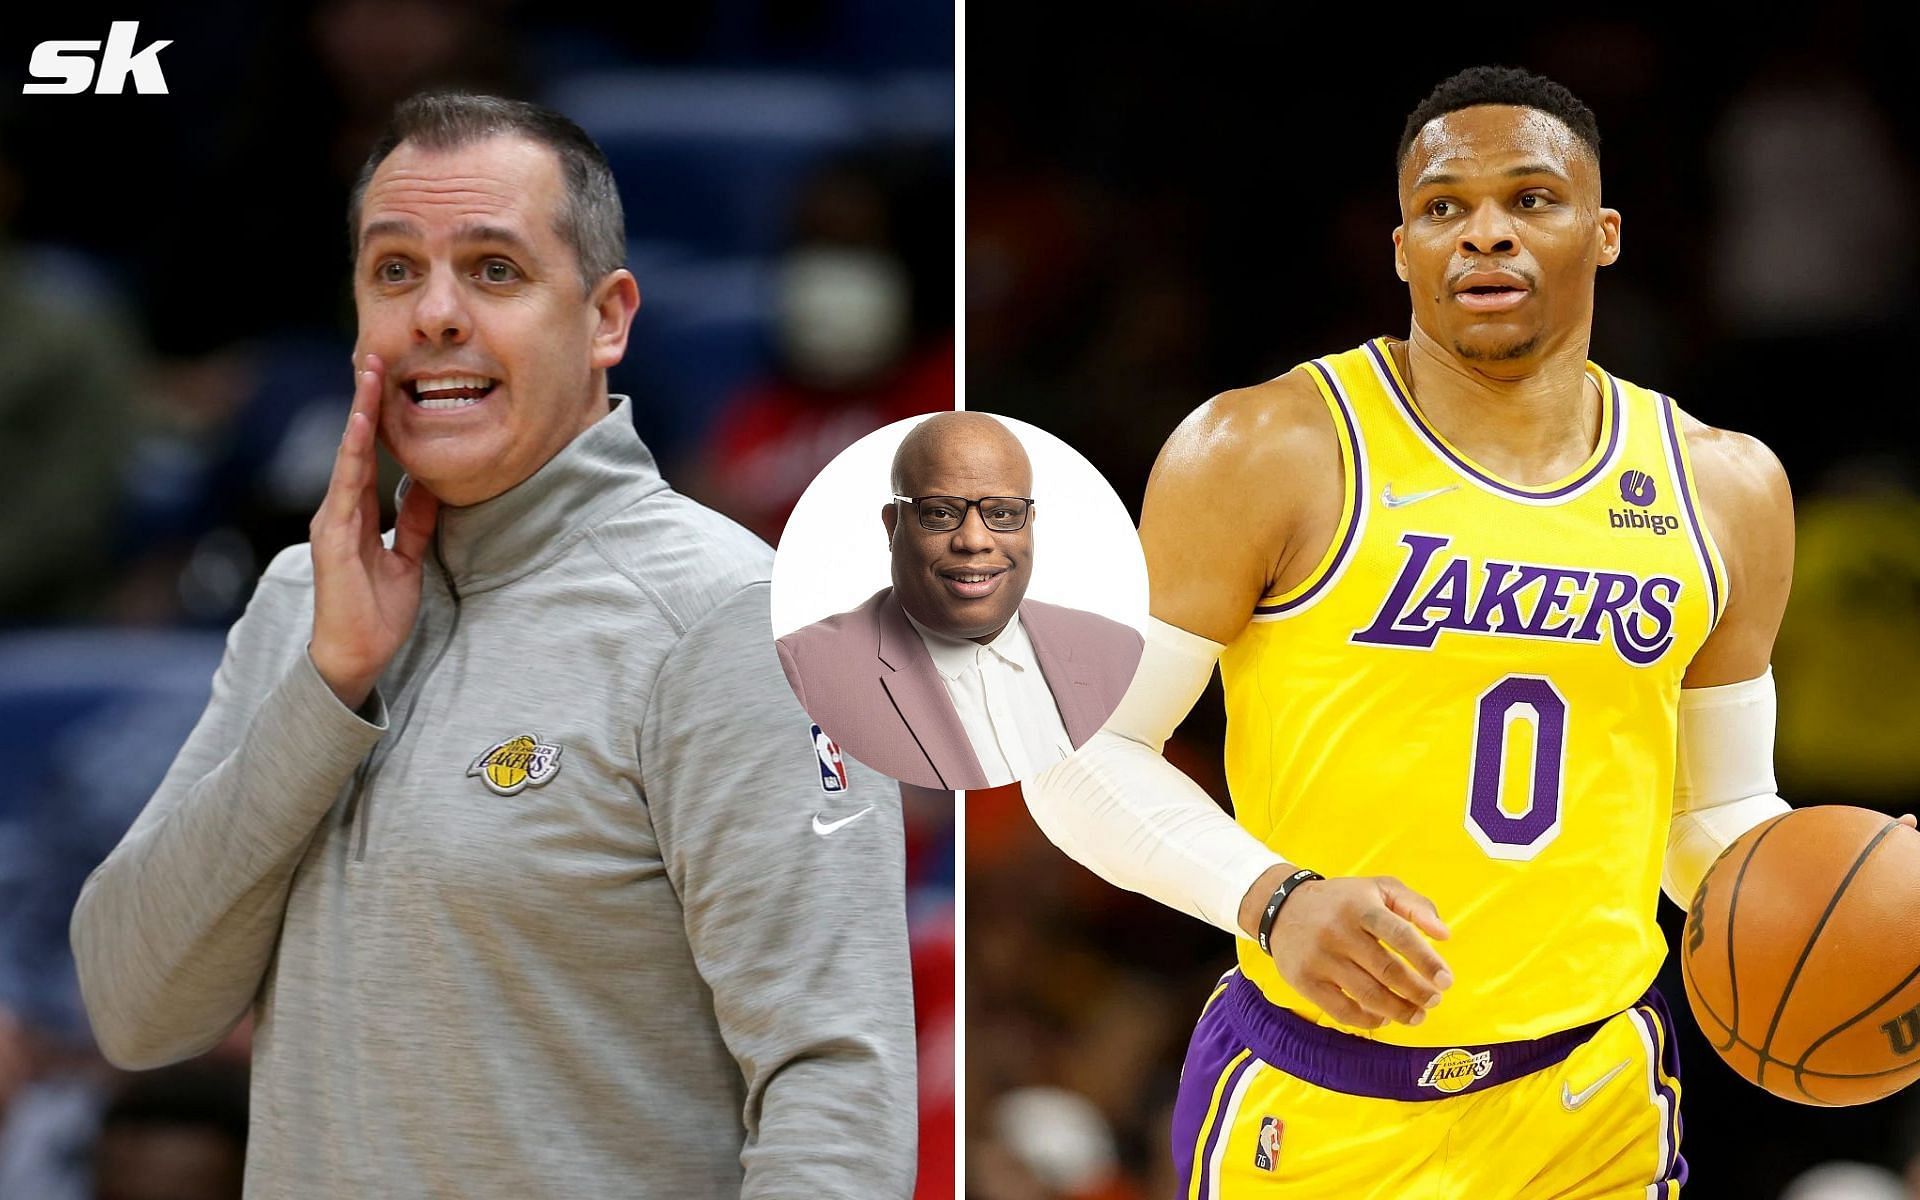 &quot;Scoop B&quot; Johnson mentions the issues between Russell Westbrook and Frank Vogel